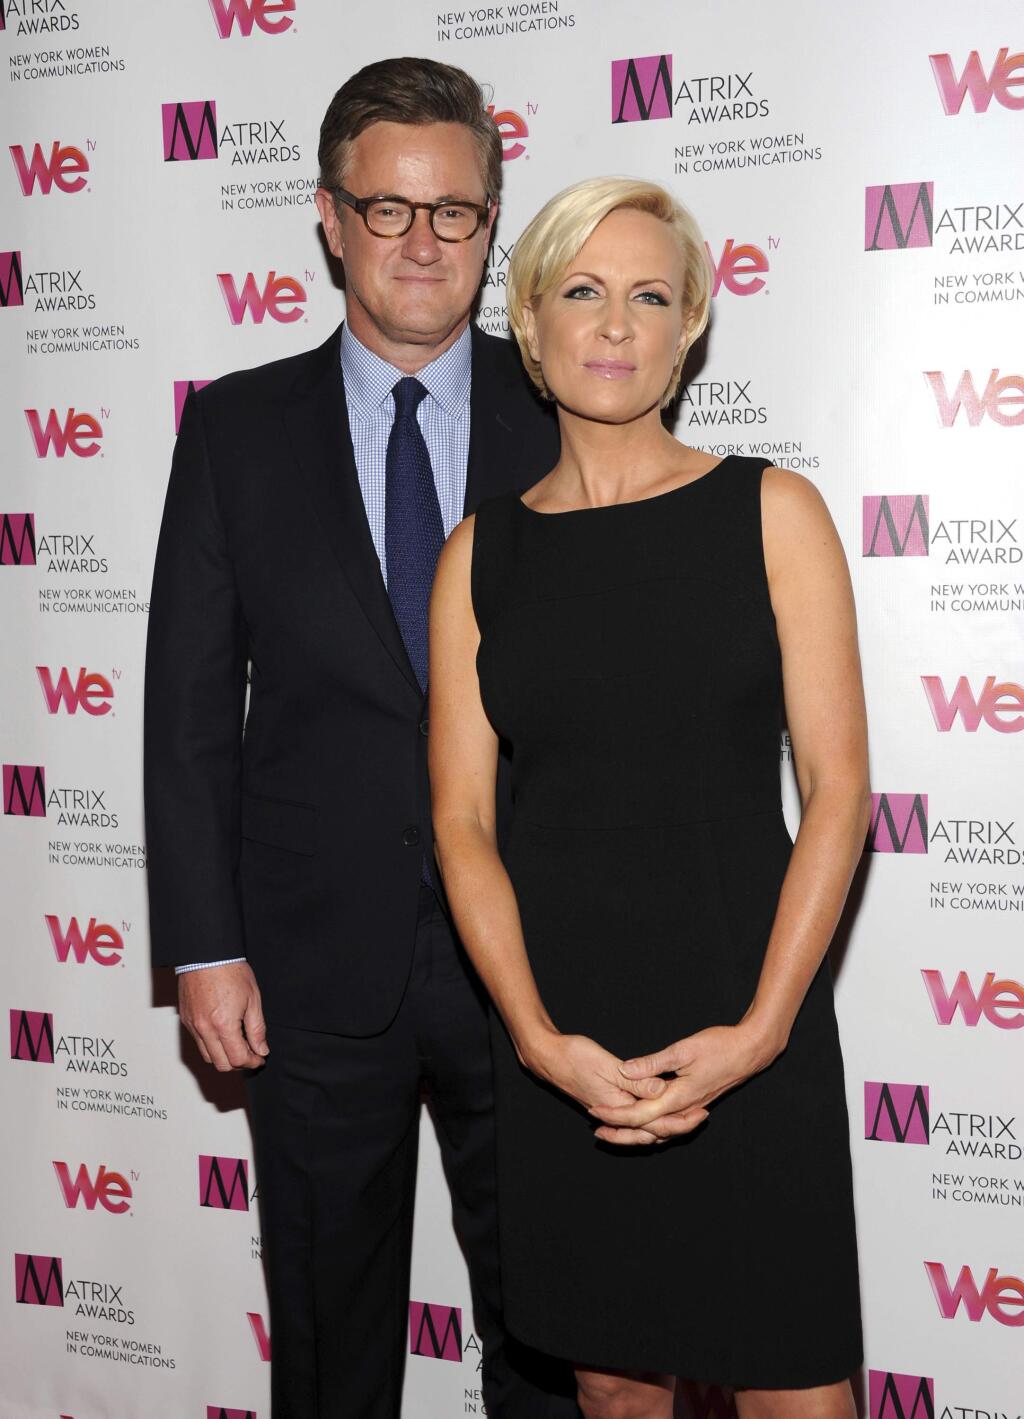 FILE - In this Monday April 22, 2013, file photo, MSNBC's 'Morning Joe' co-hosts Joe Scarborough and Mika Brzezinski, right, attend the 2013 Matrix New York Women in Communications Awards at the Waldorf-Astoria Hotel in New York. MSNBC confirmed Thursday, May 4, 2017, that the “Morning Joe” co-hosts are engaged. (Photo by Evan Agostini/Invision/AP, File)